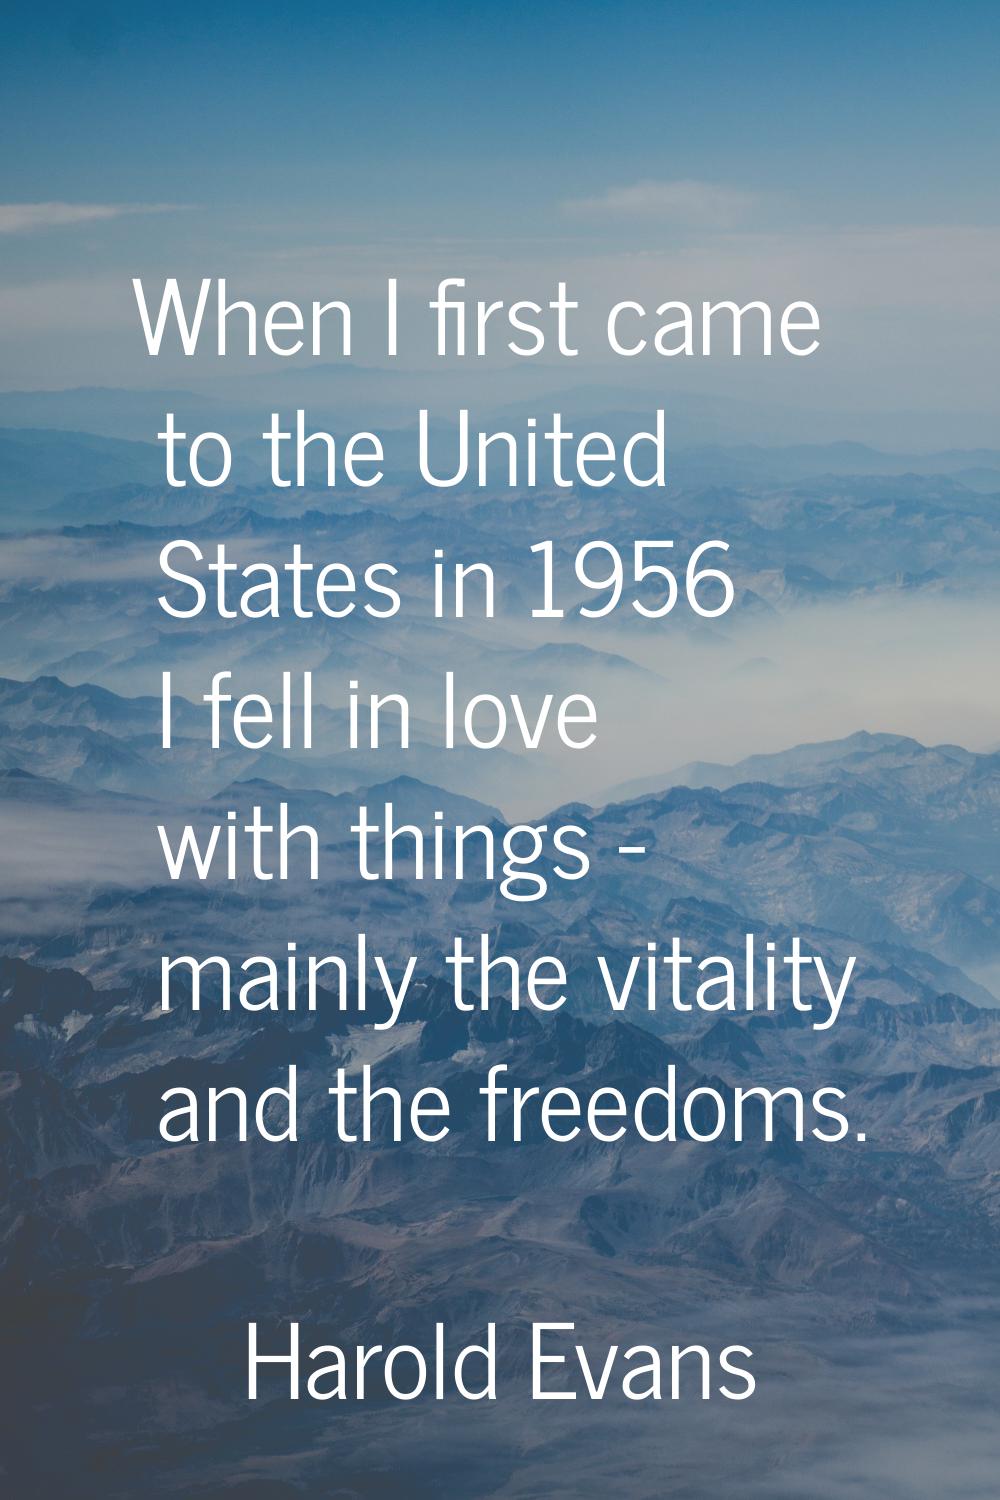 When I first came to the United States in 1956 I fell in love with things - mainly the vitality and